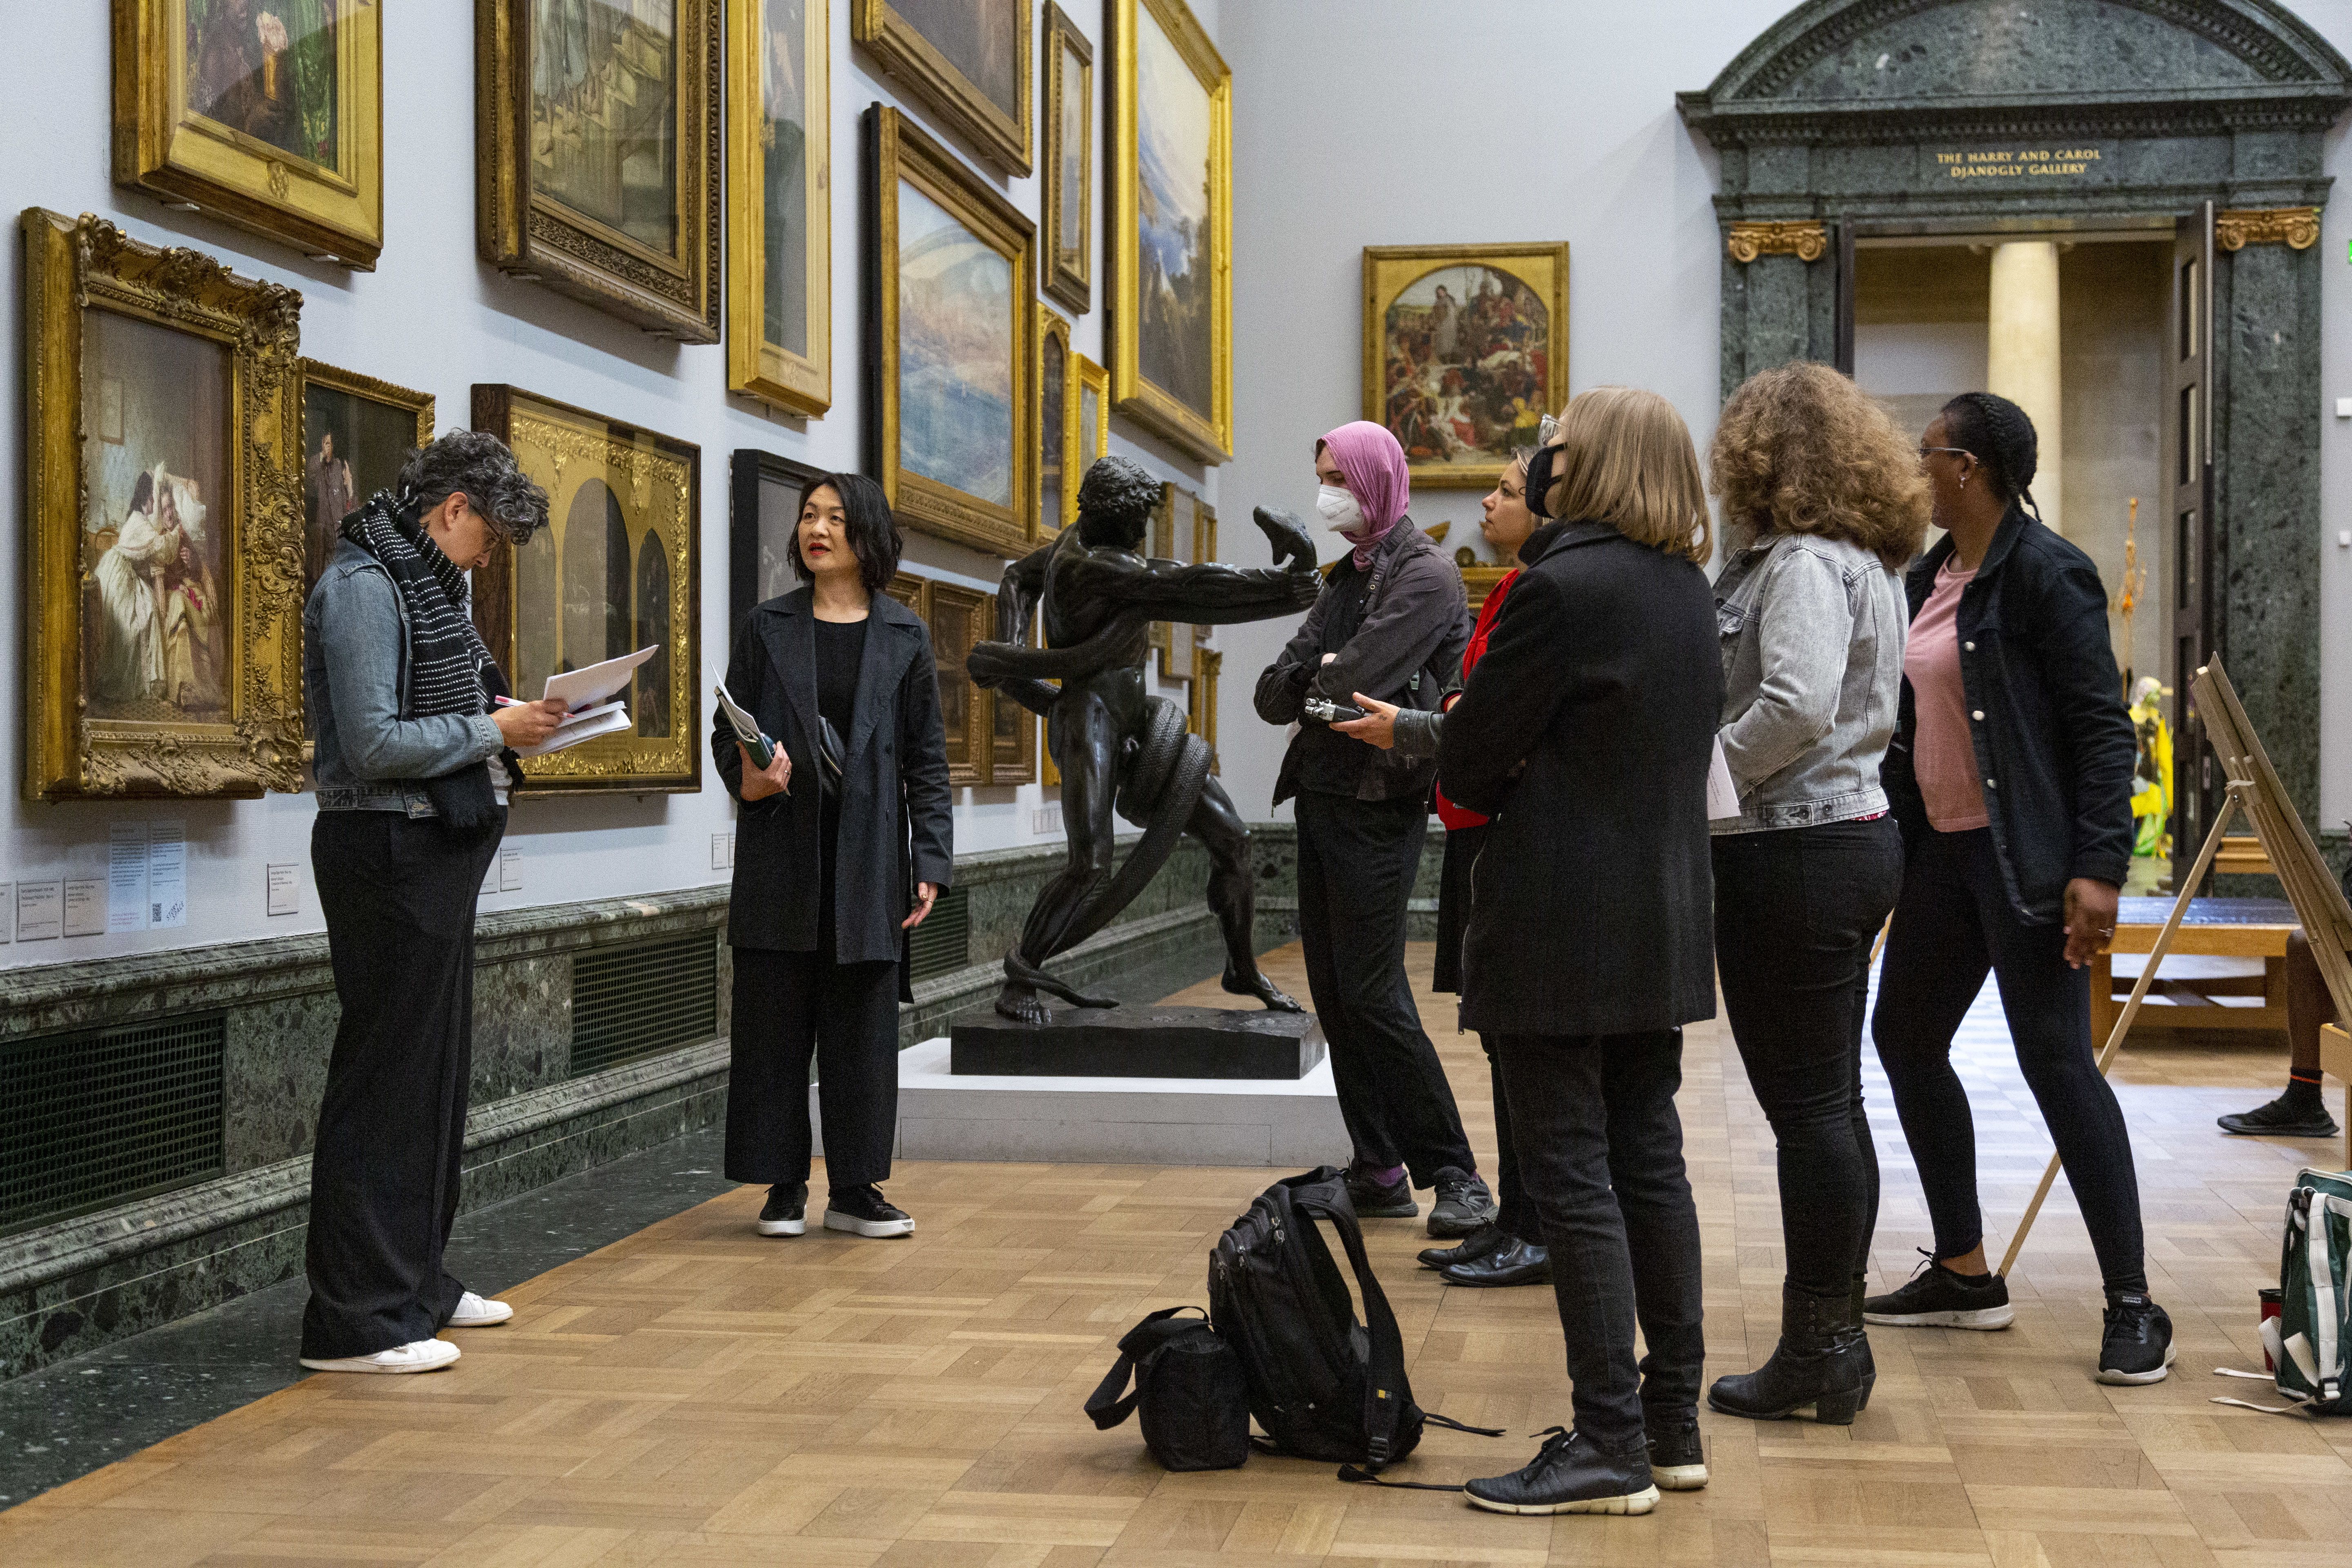 A group of people in a museum looking at ornately framed artworks on the wall. There is a parquet floor and a doorway in the background with pillars 